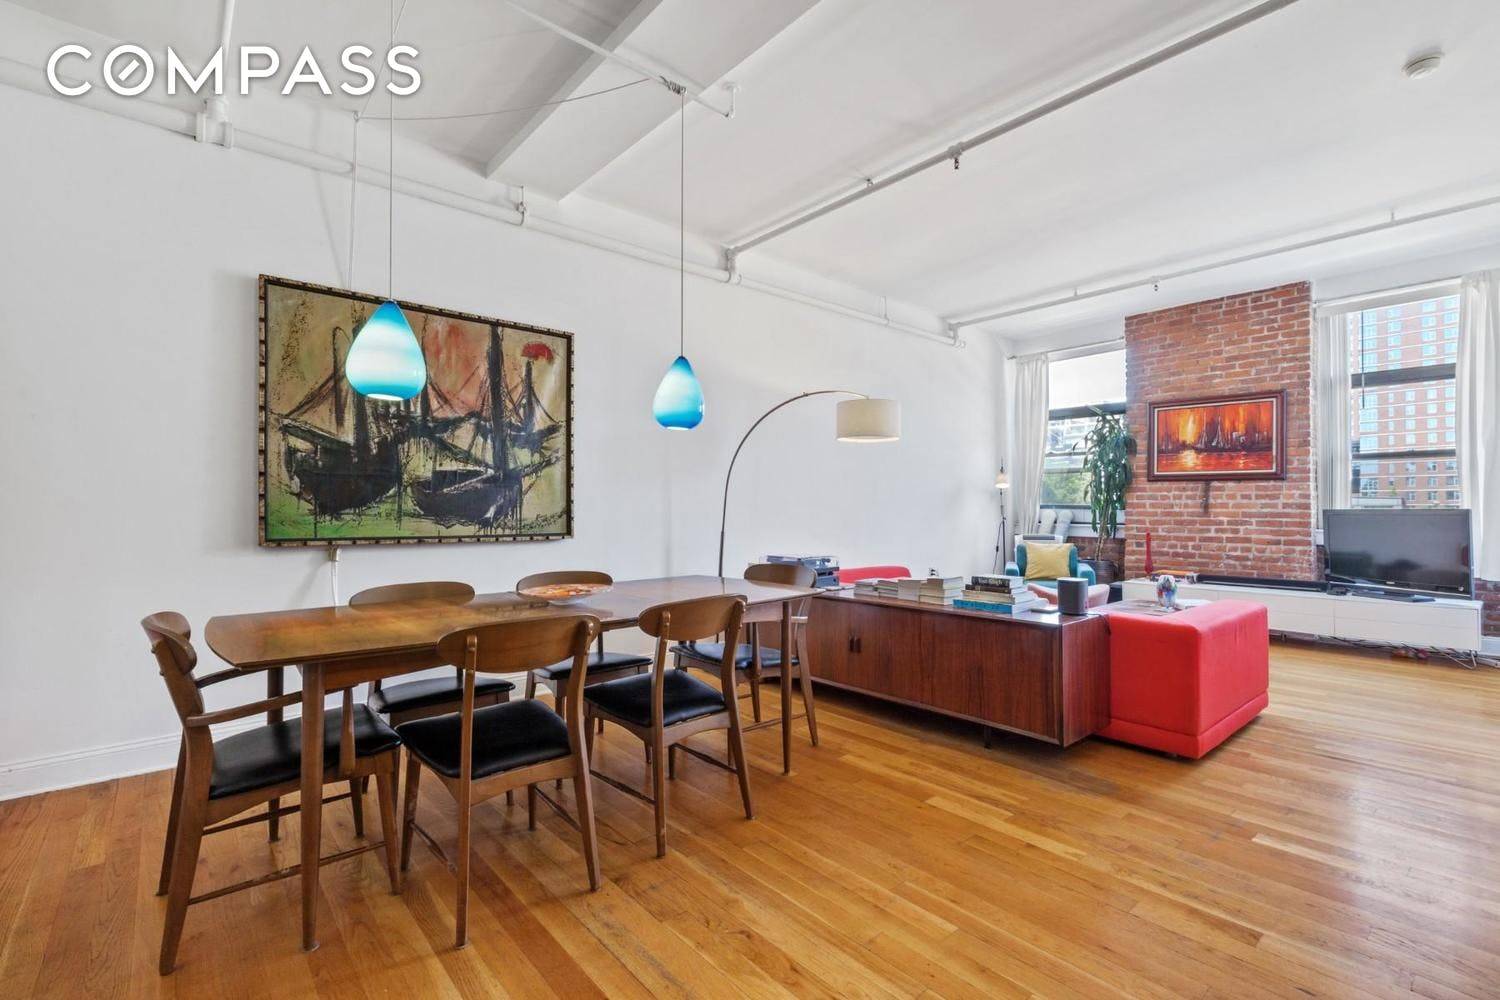 Prime rental opportunity in this huge Loft style one bedroom apartment located in the sought after The Bridges Condominium in Dumbo Vinegar Hill.